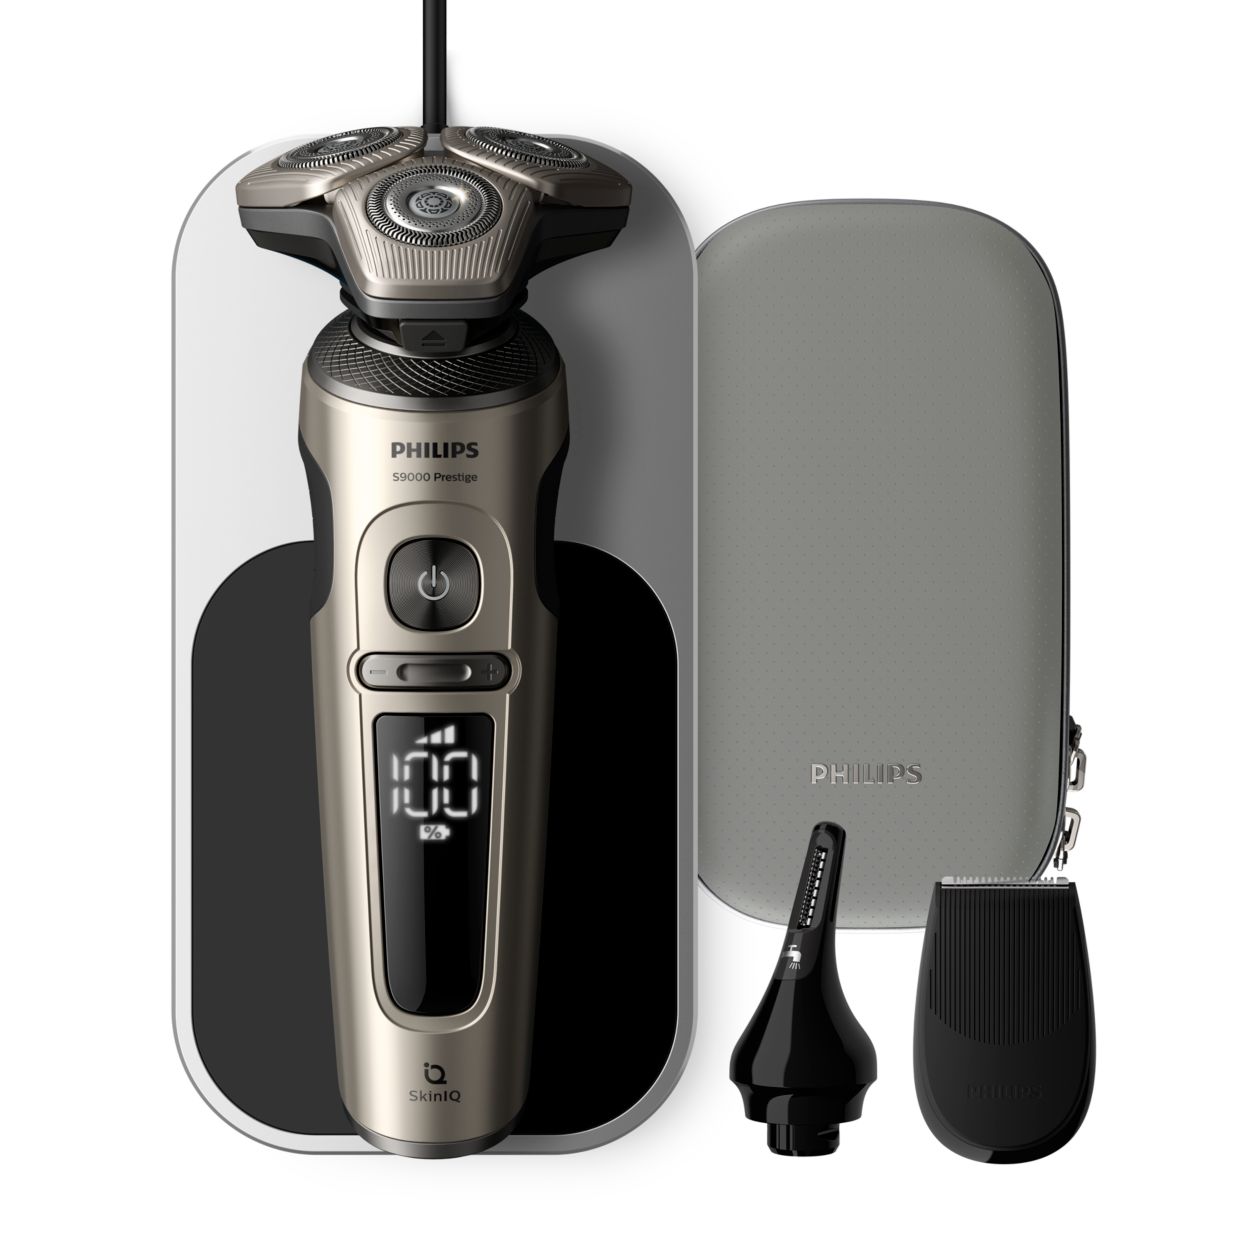 Shaver S9000 Prestige Wet & Dry Electric shaver with SkinIQ SP9873 